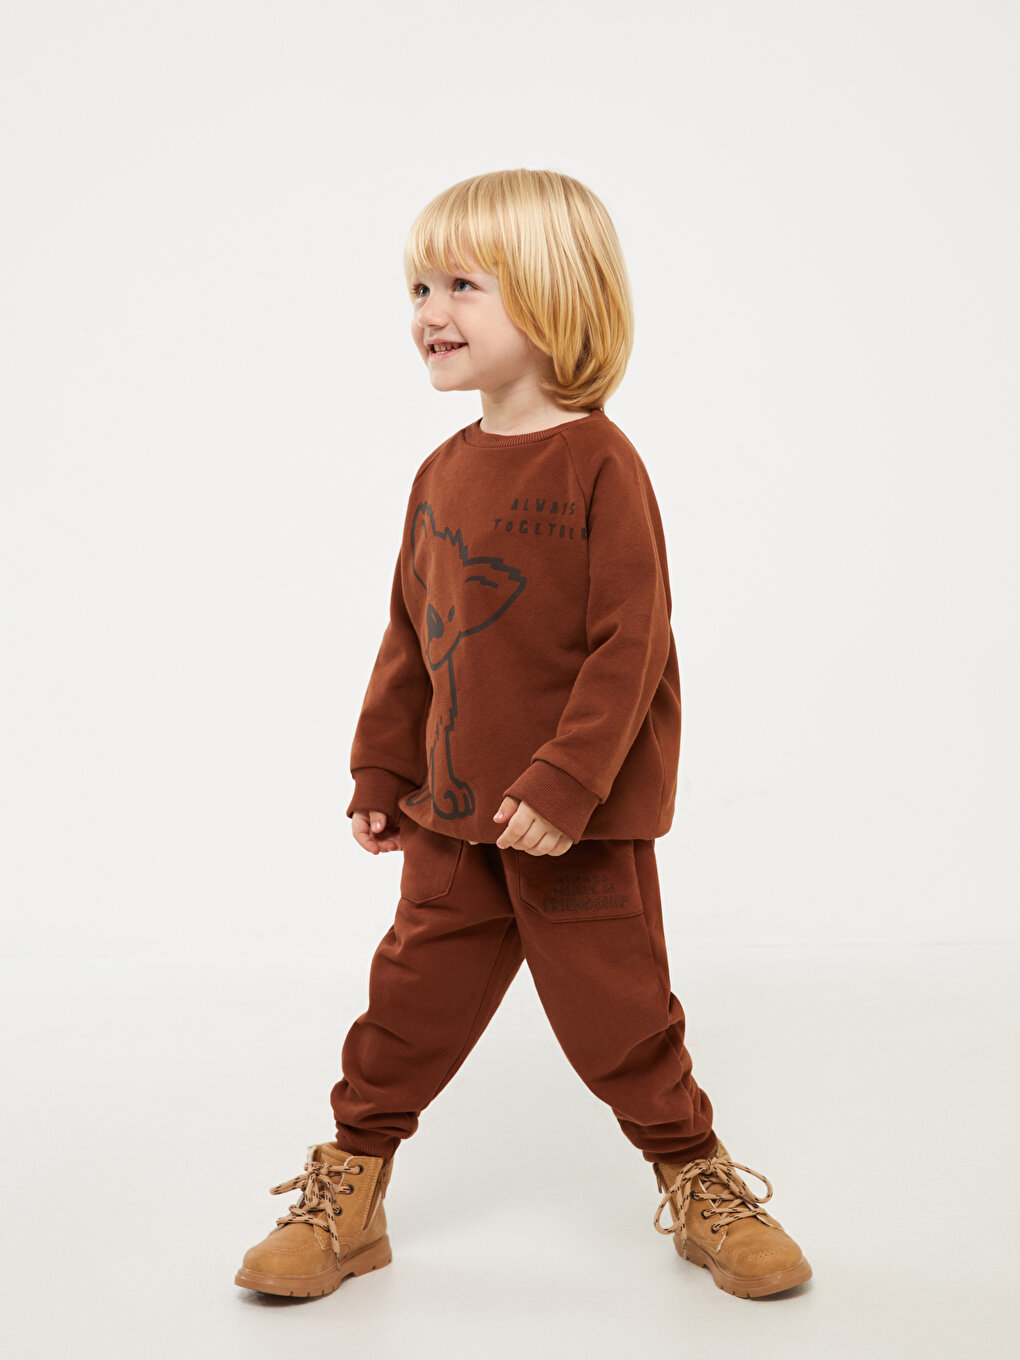 Buy SHOPMORE Track Suit for Boy's | Pure Woolen| Winter Jacket and Trouser  Set for Kid's | Size - 1 year - 14 year | at Amazon.in